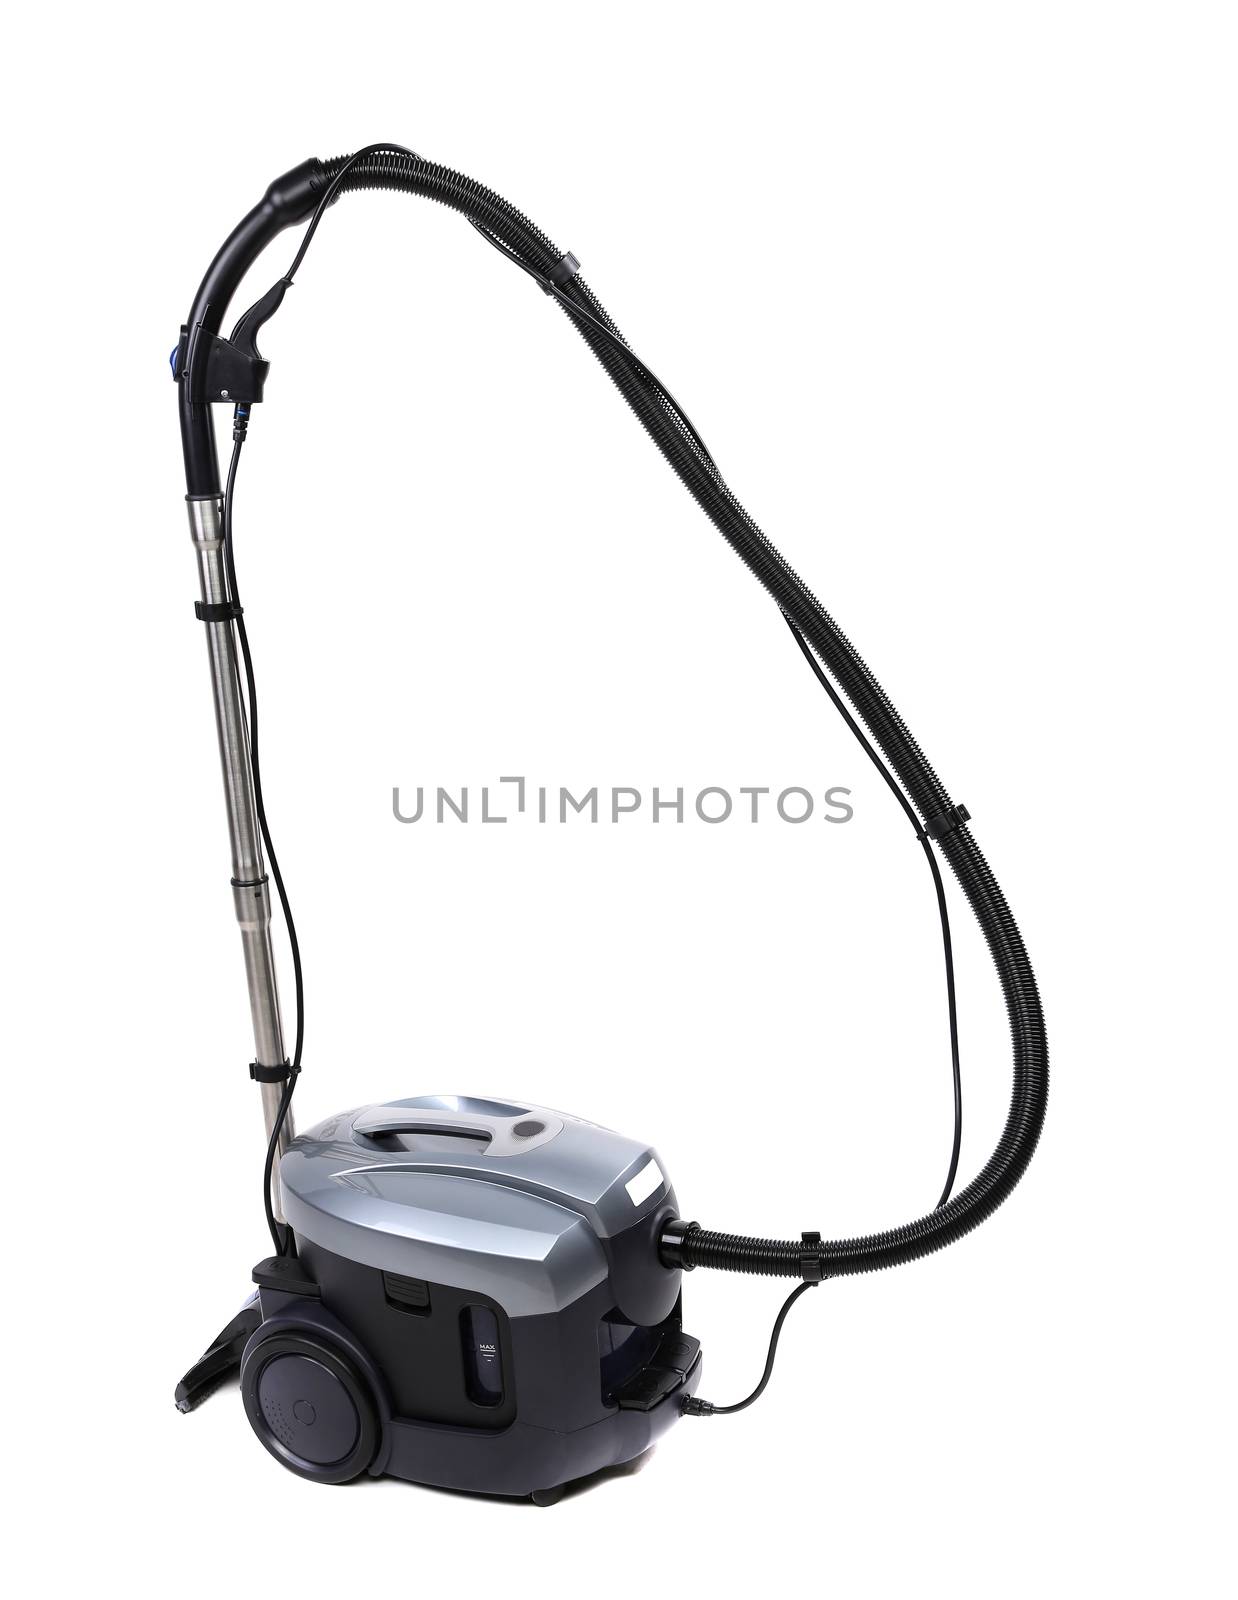 Vacuum cleaner are located on a white background.